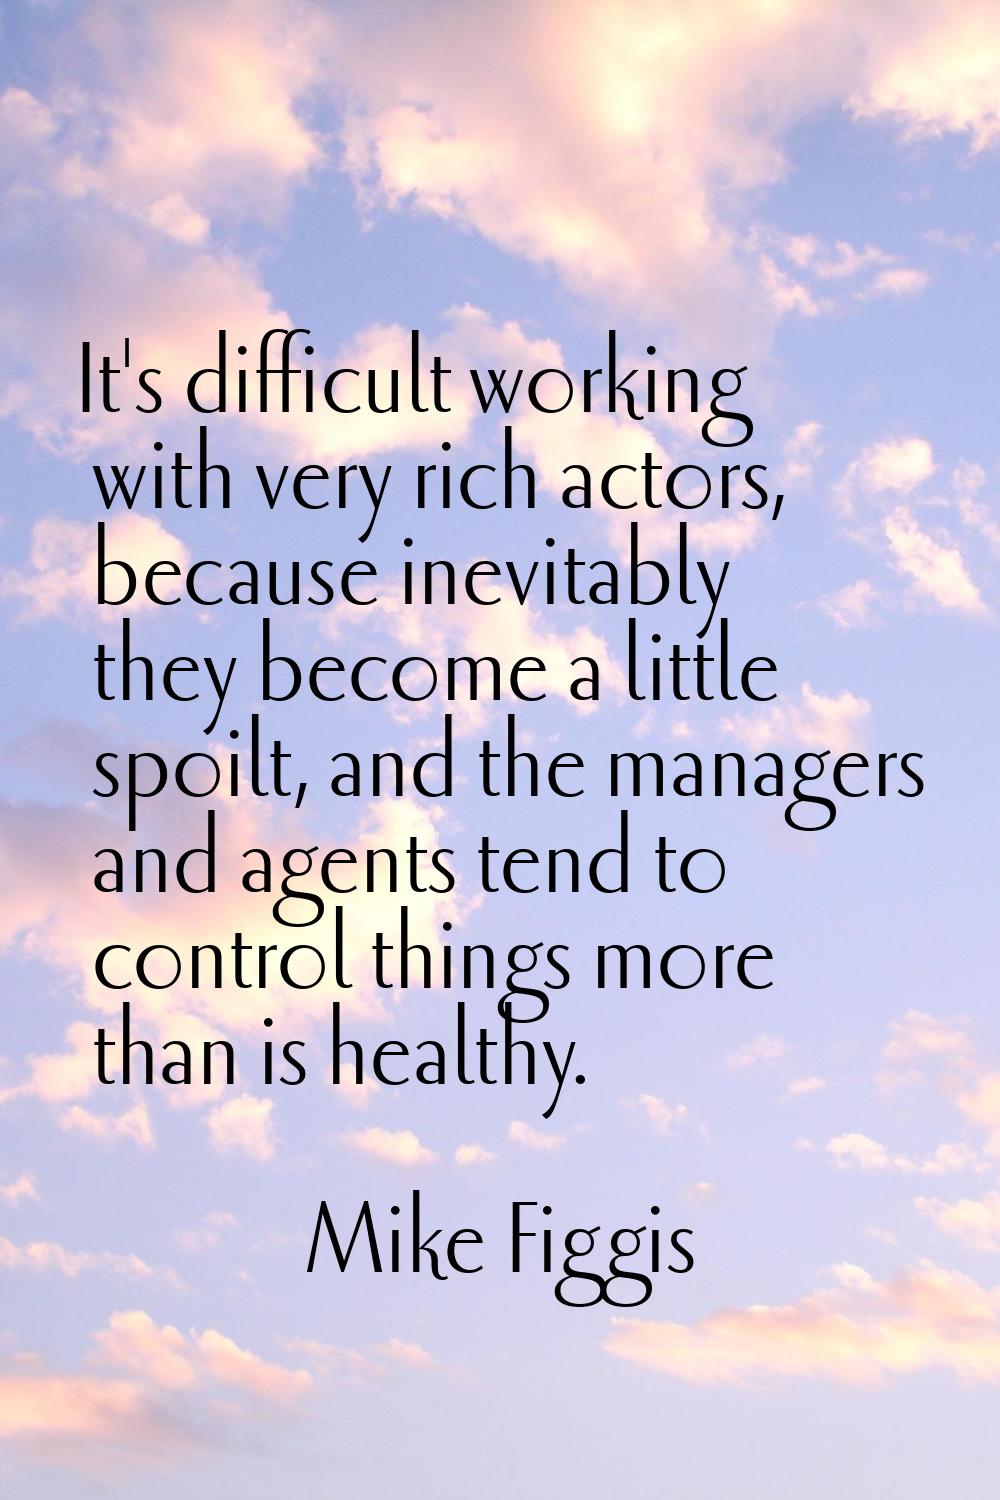 It's difficult working with very rich actors, because inevitably they become a little spoilt, and t